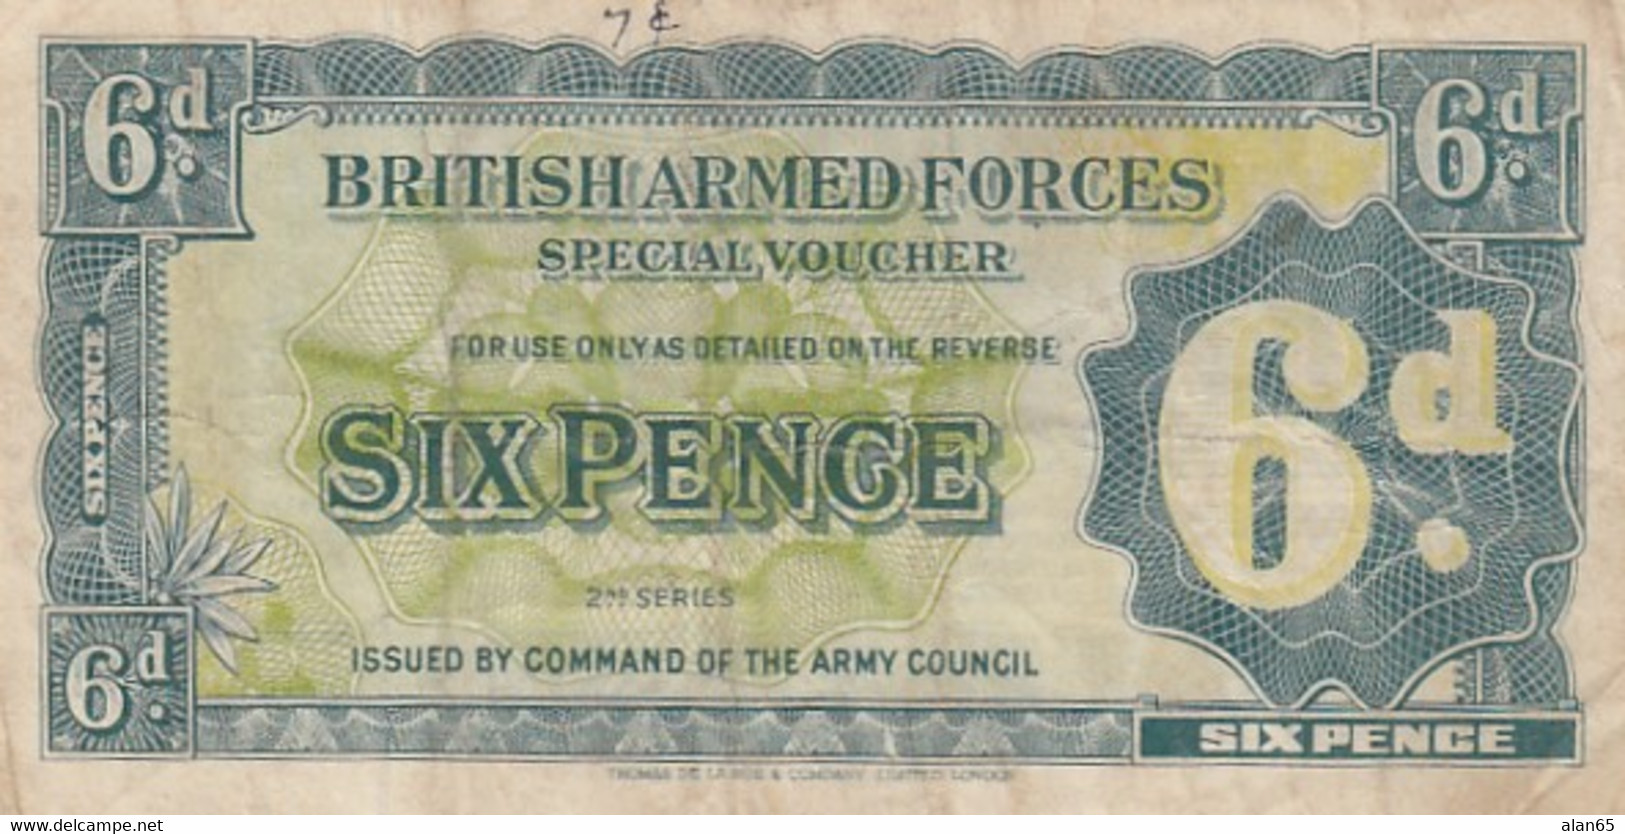 Great Britain #M17a 6 Pence 1948 British Armed Forces Special Voucher Currency - Forze Armate Britanniche & Docuementi Speciali